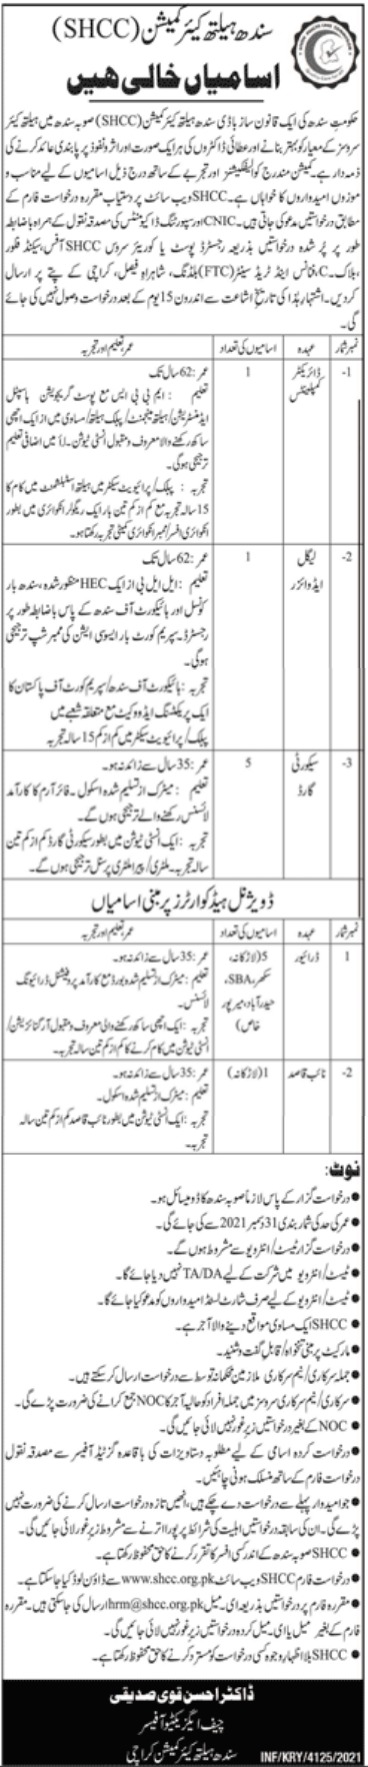 Sindh Health Care Commission Jobs 2021